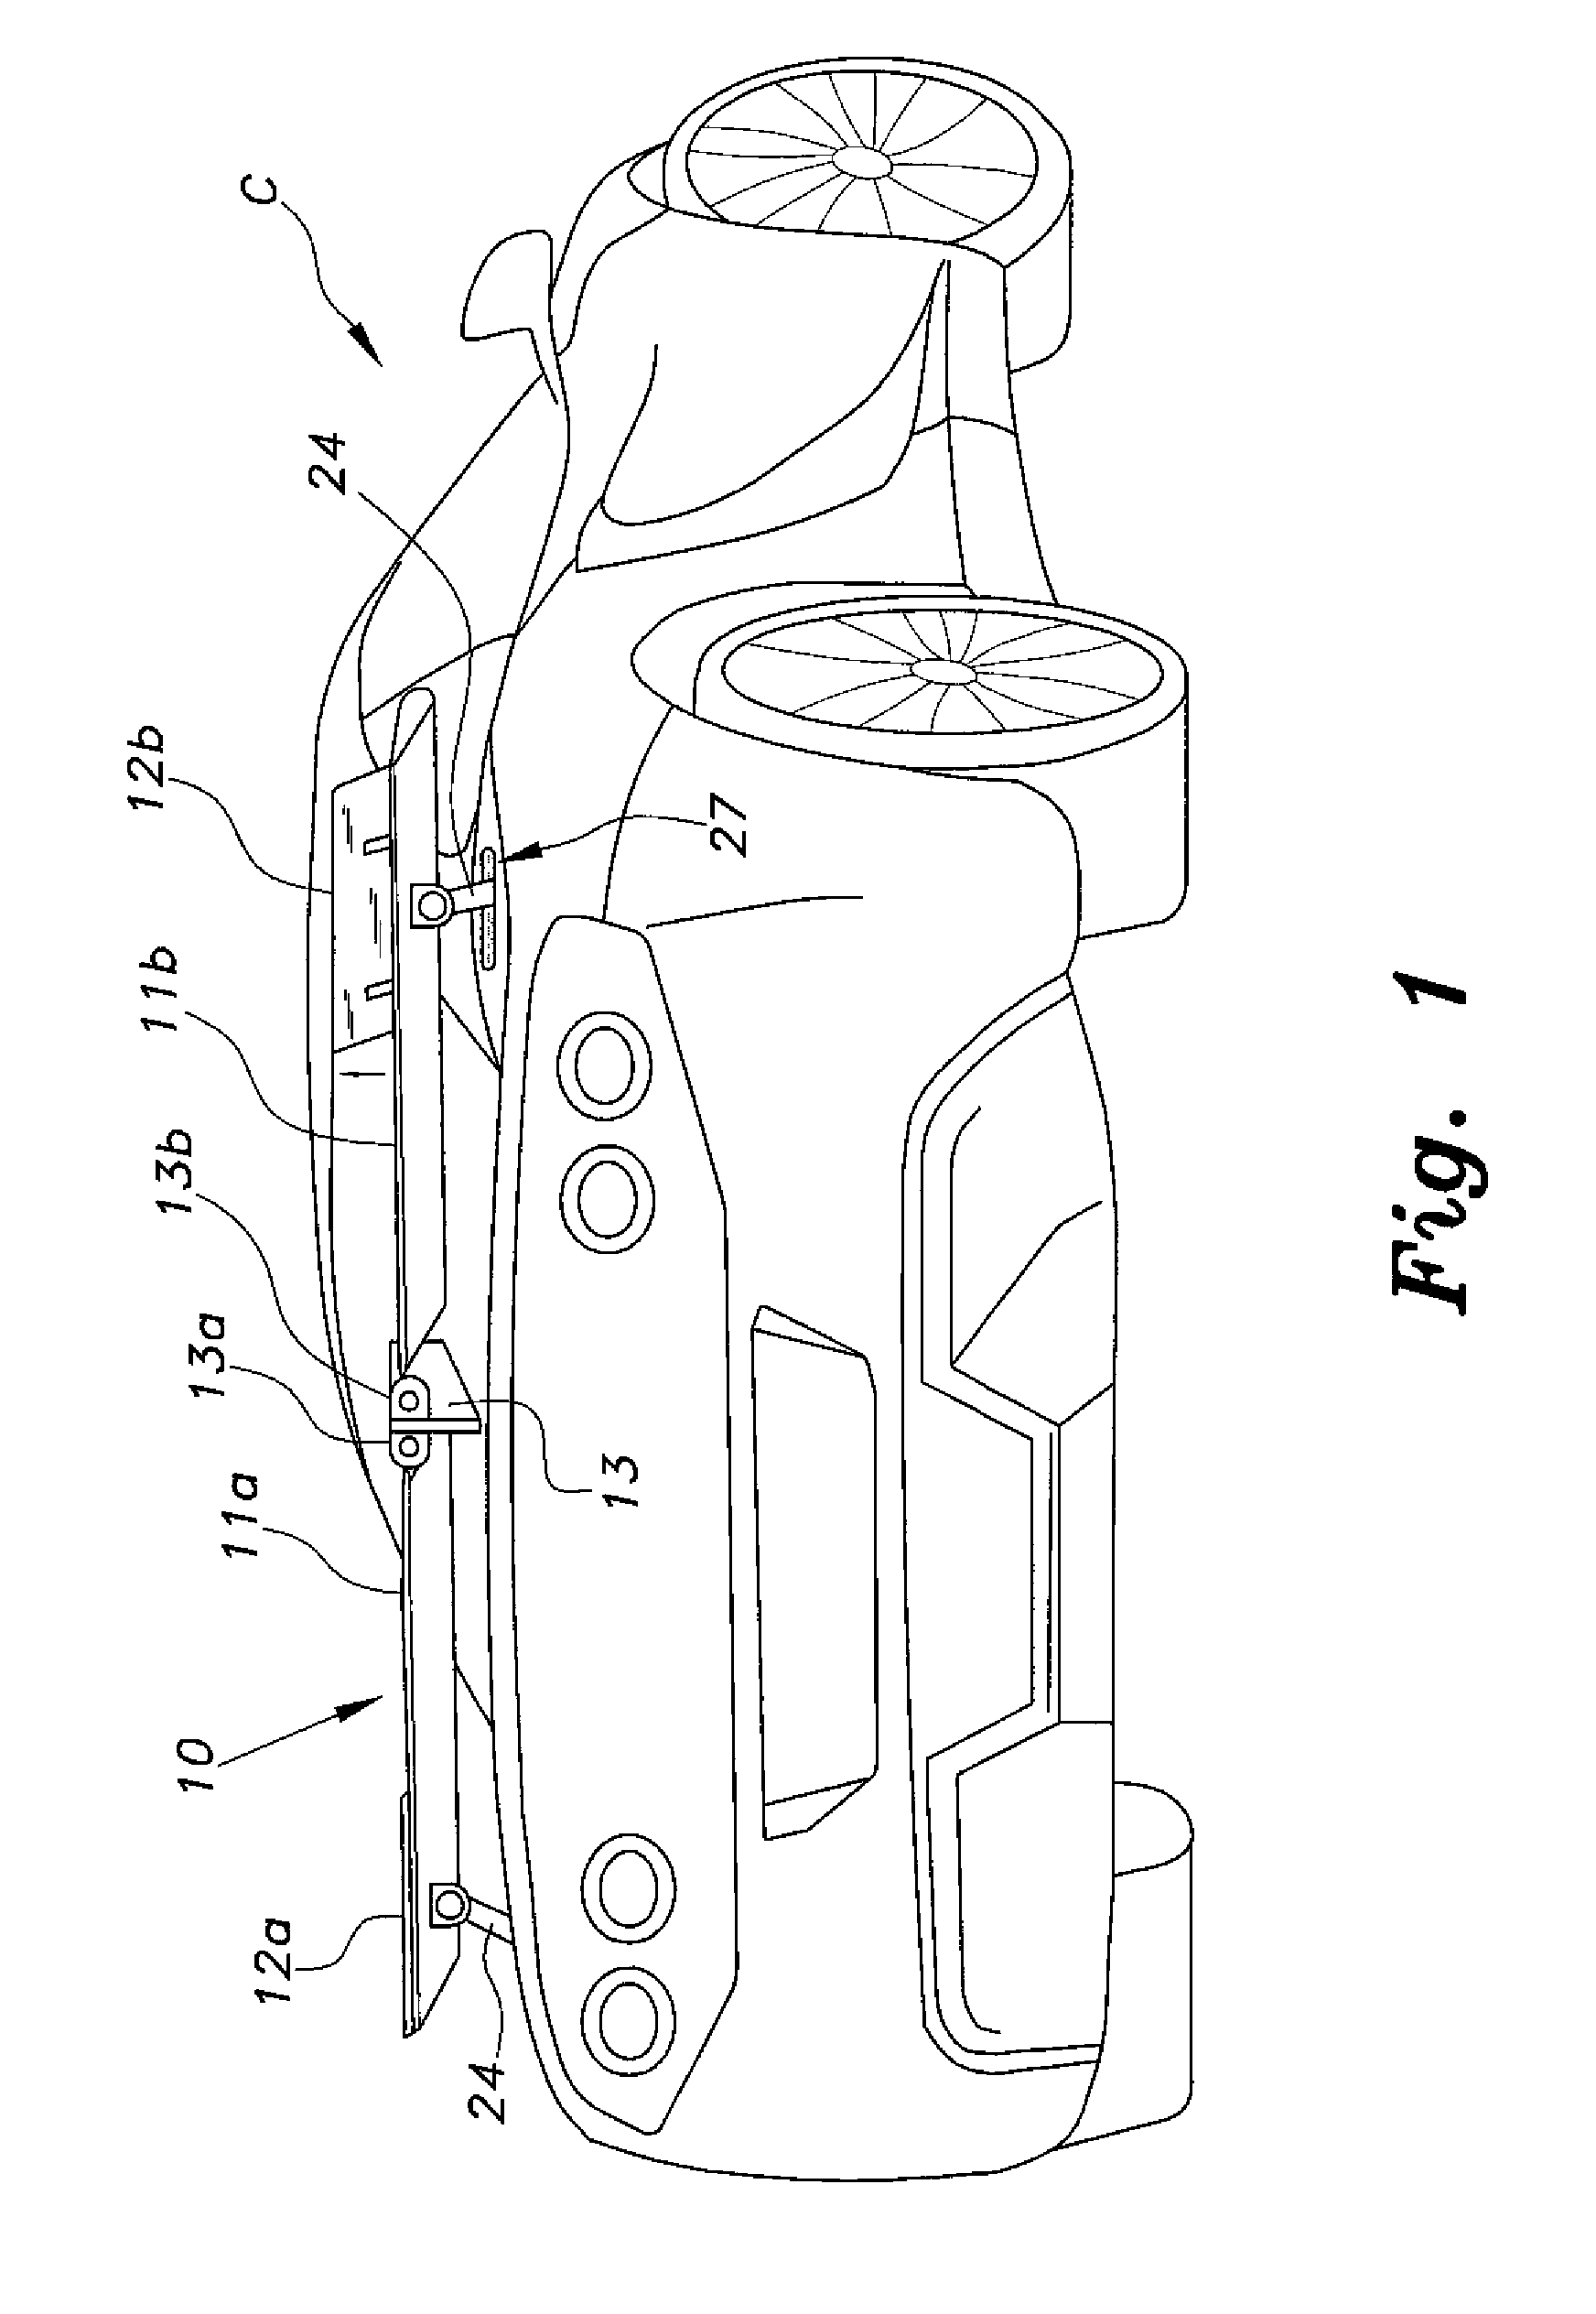 Dynamically adjustable airfoil system for road vehicles